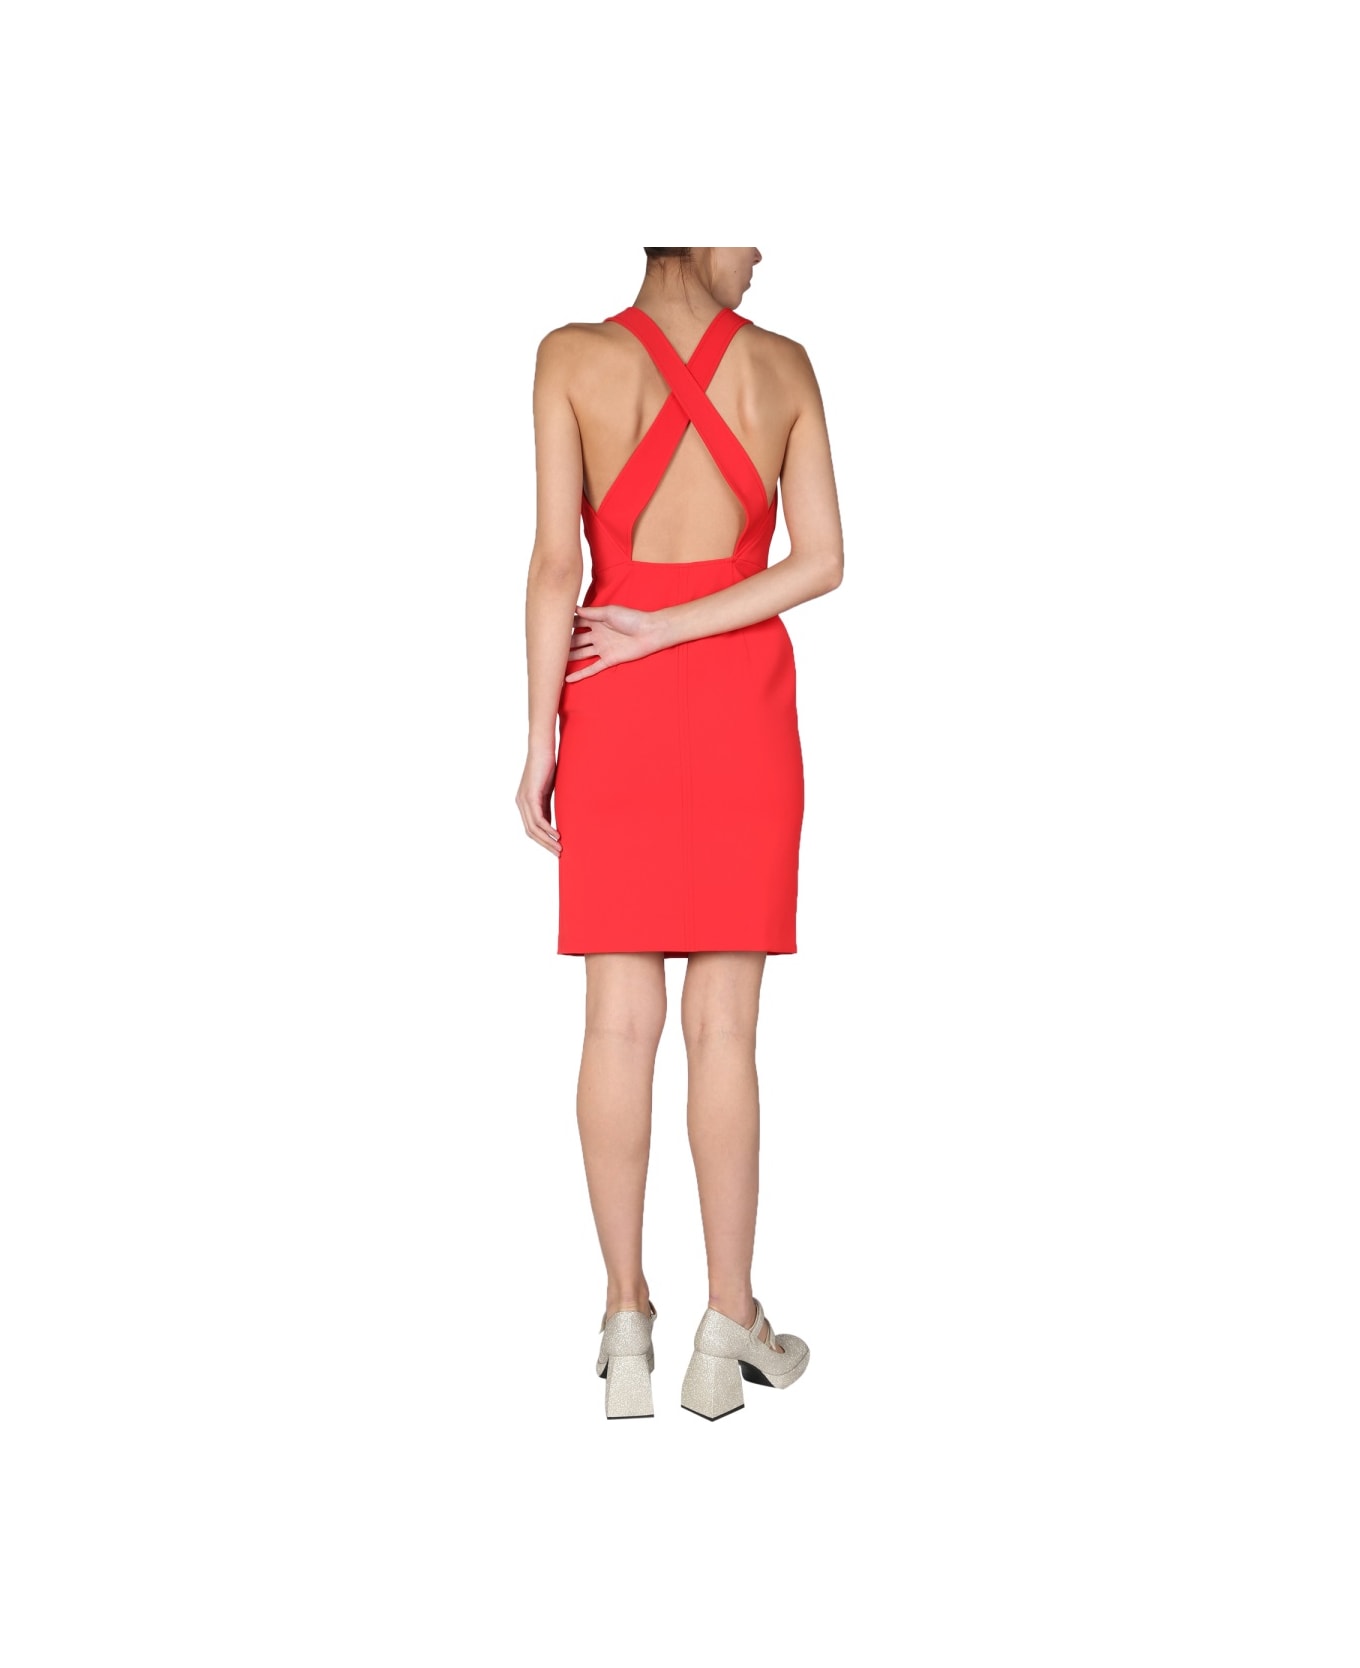 Boutique Moschino Dress With Cut Out Detail - RED